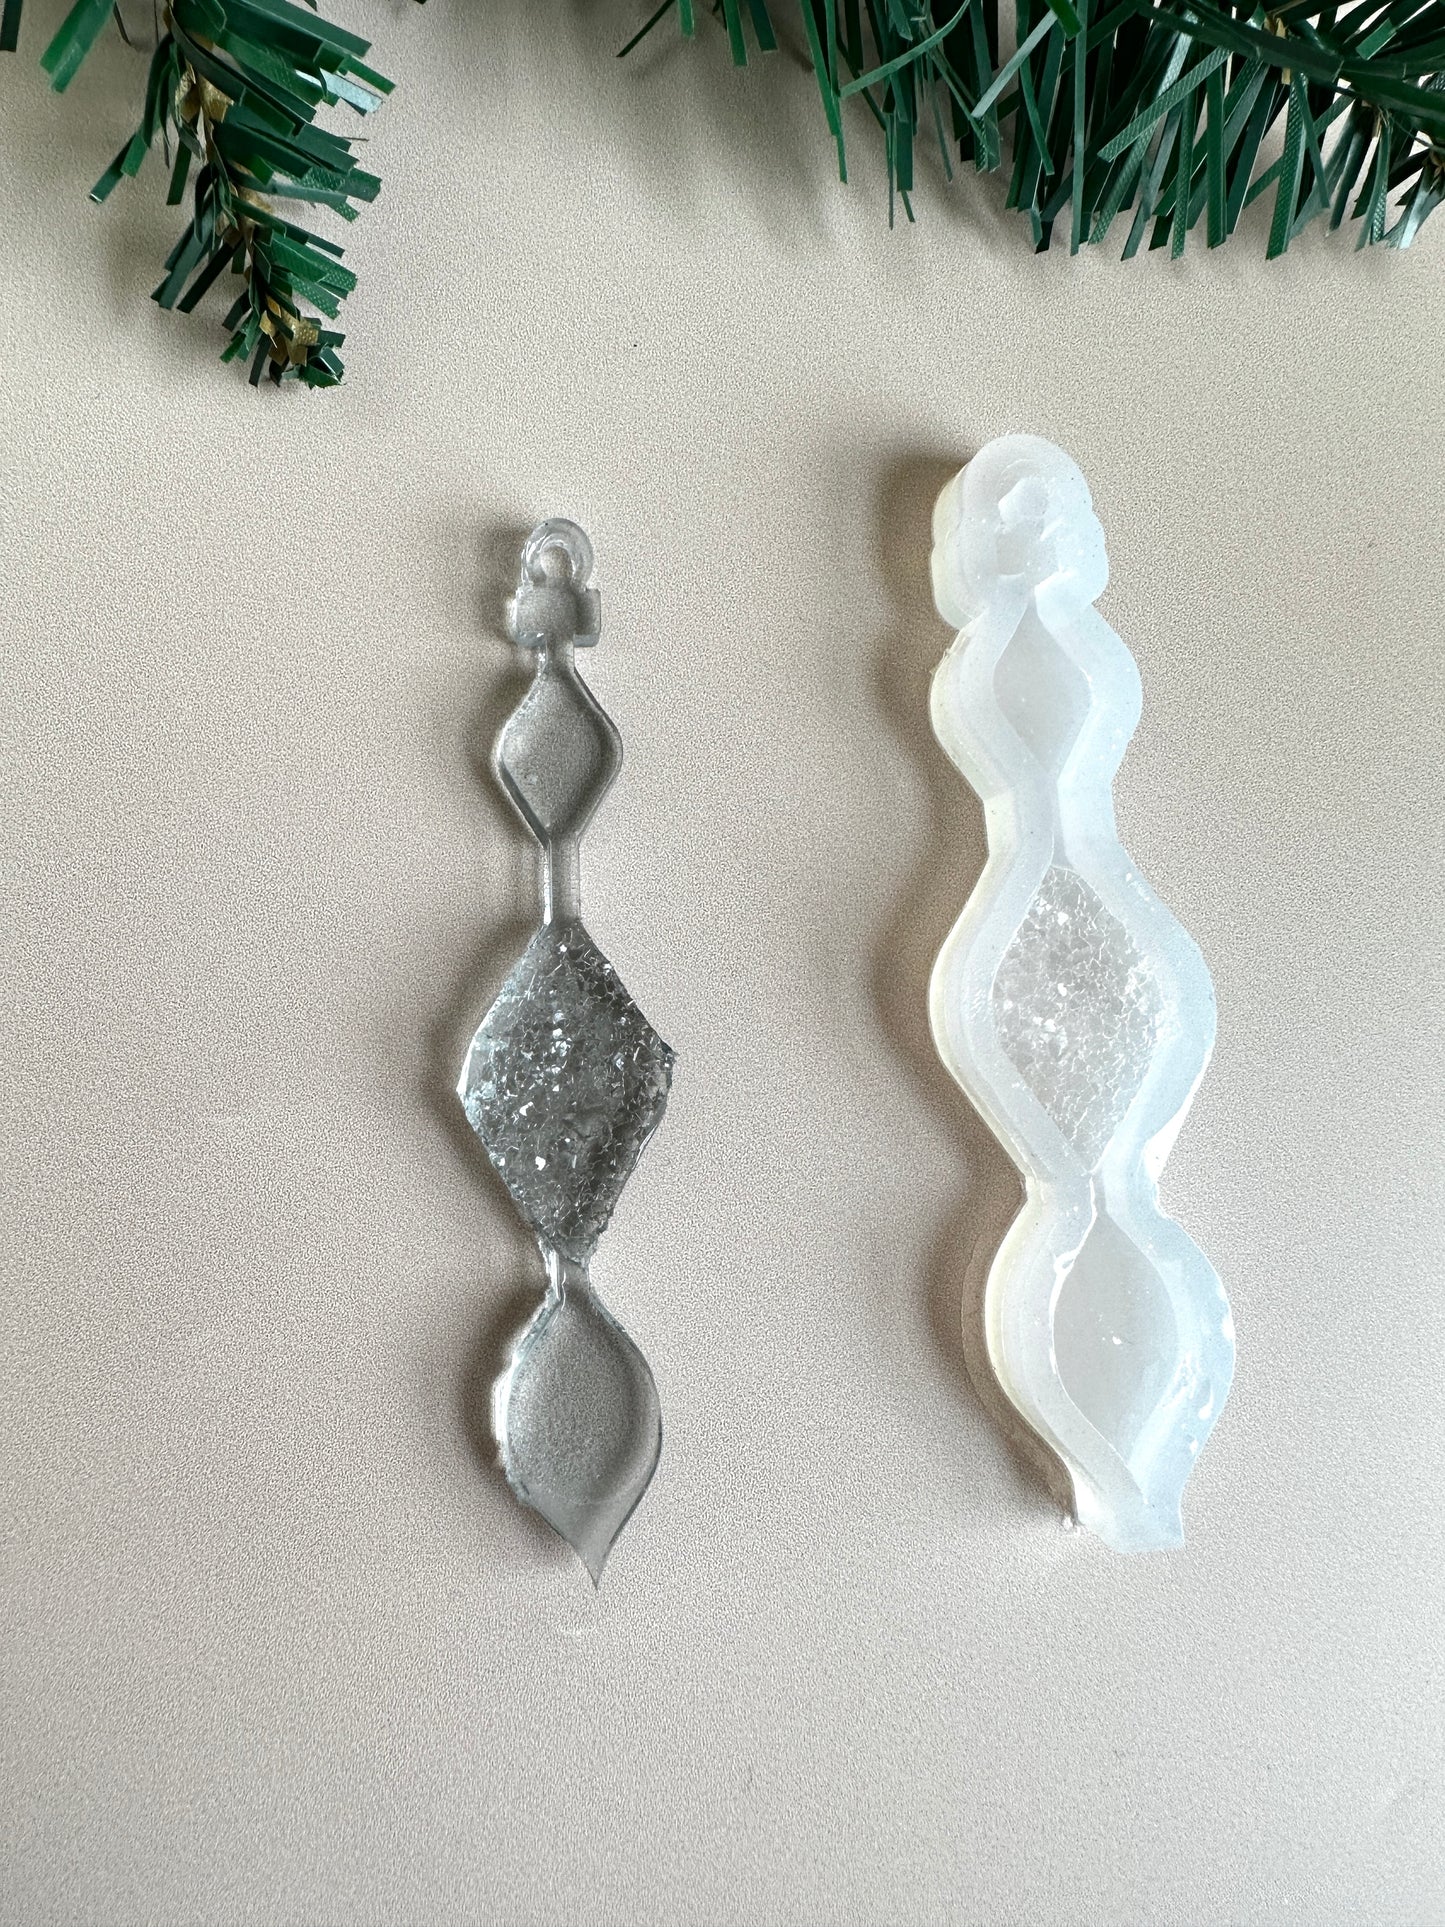 Christmas Tree Ornament with Crystals Silicone Mold - Icicle Shaped Molds for Resin Crafting - Perfect DIY Holiday Decor Gift